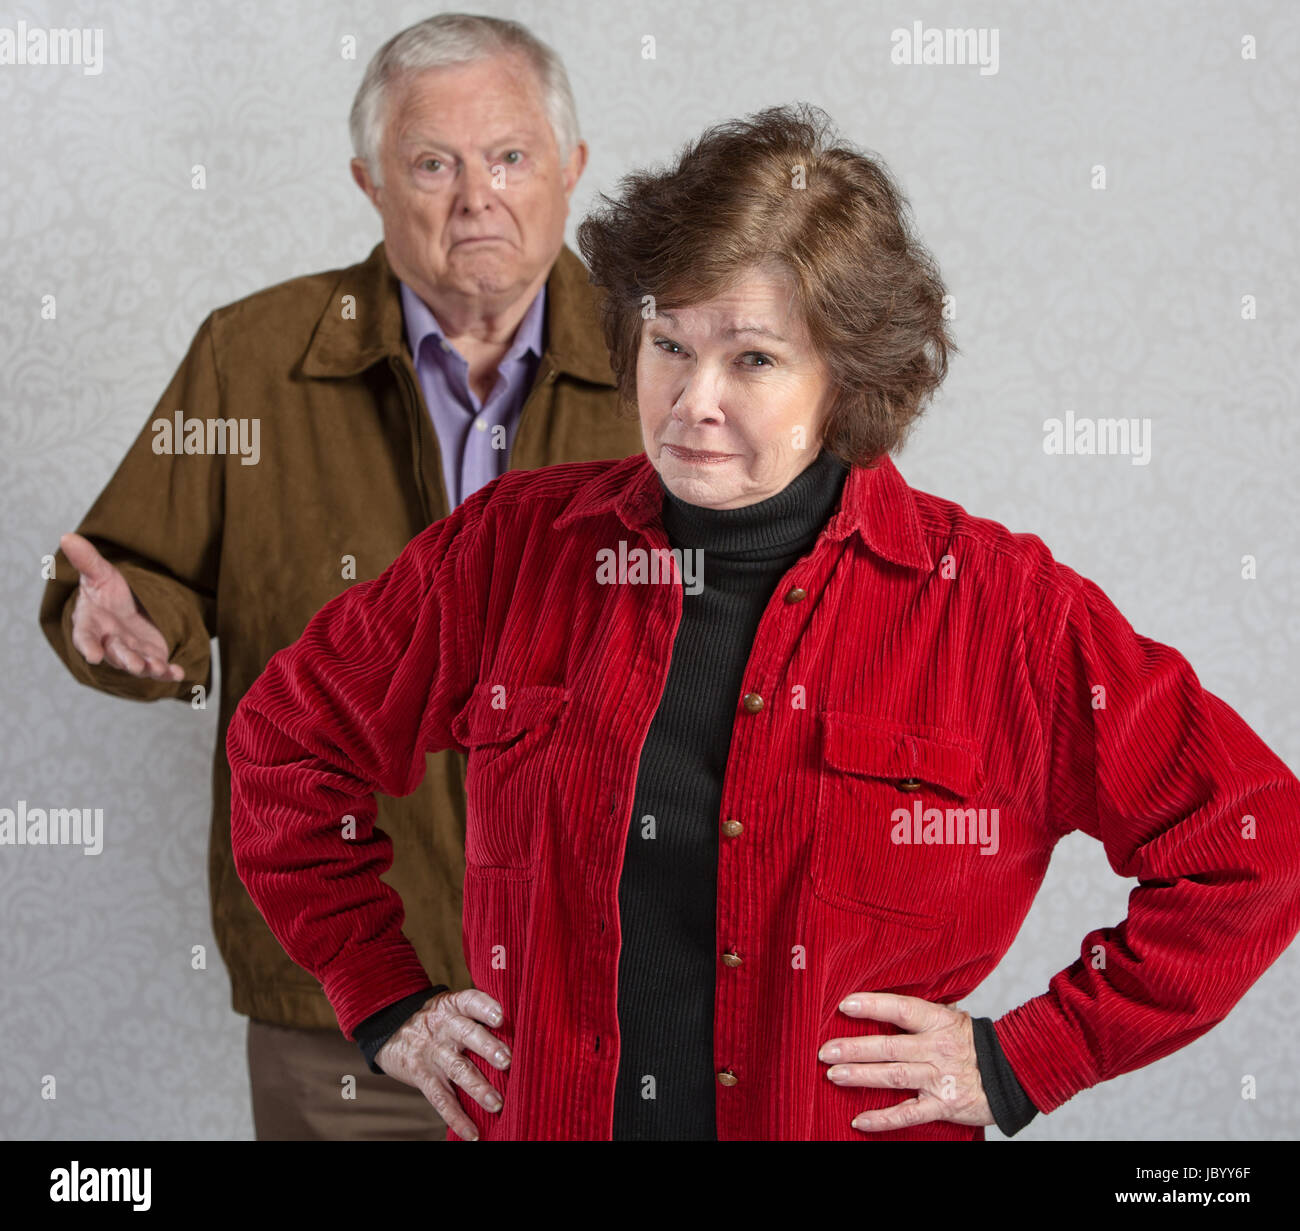 Suspicious senior woman in front of confused man Stock Photo